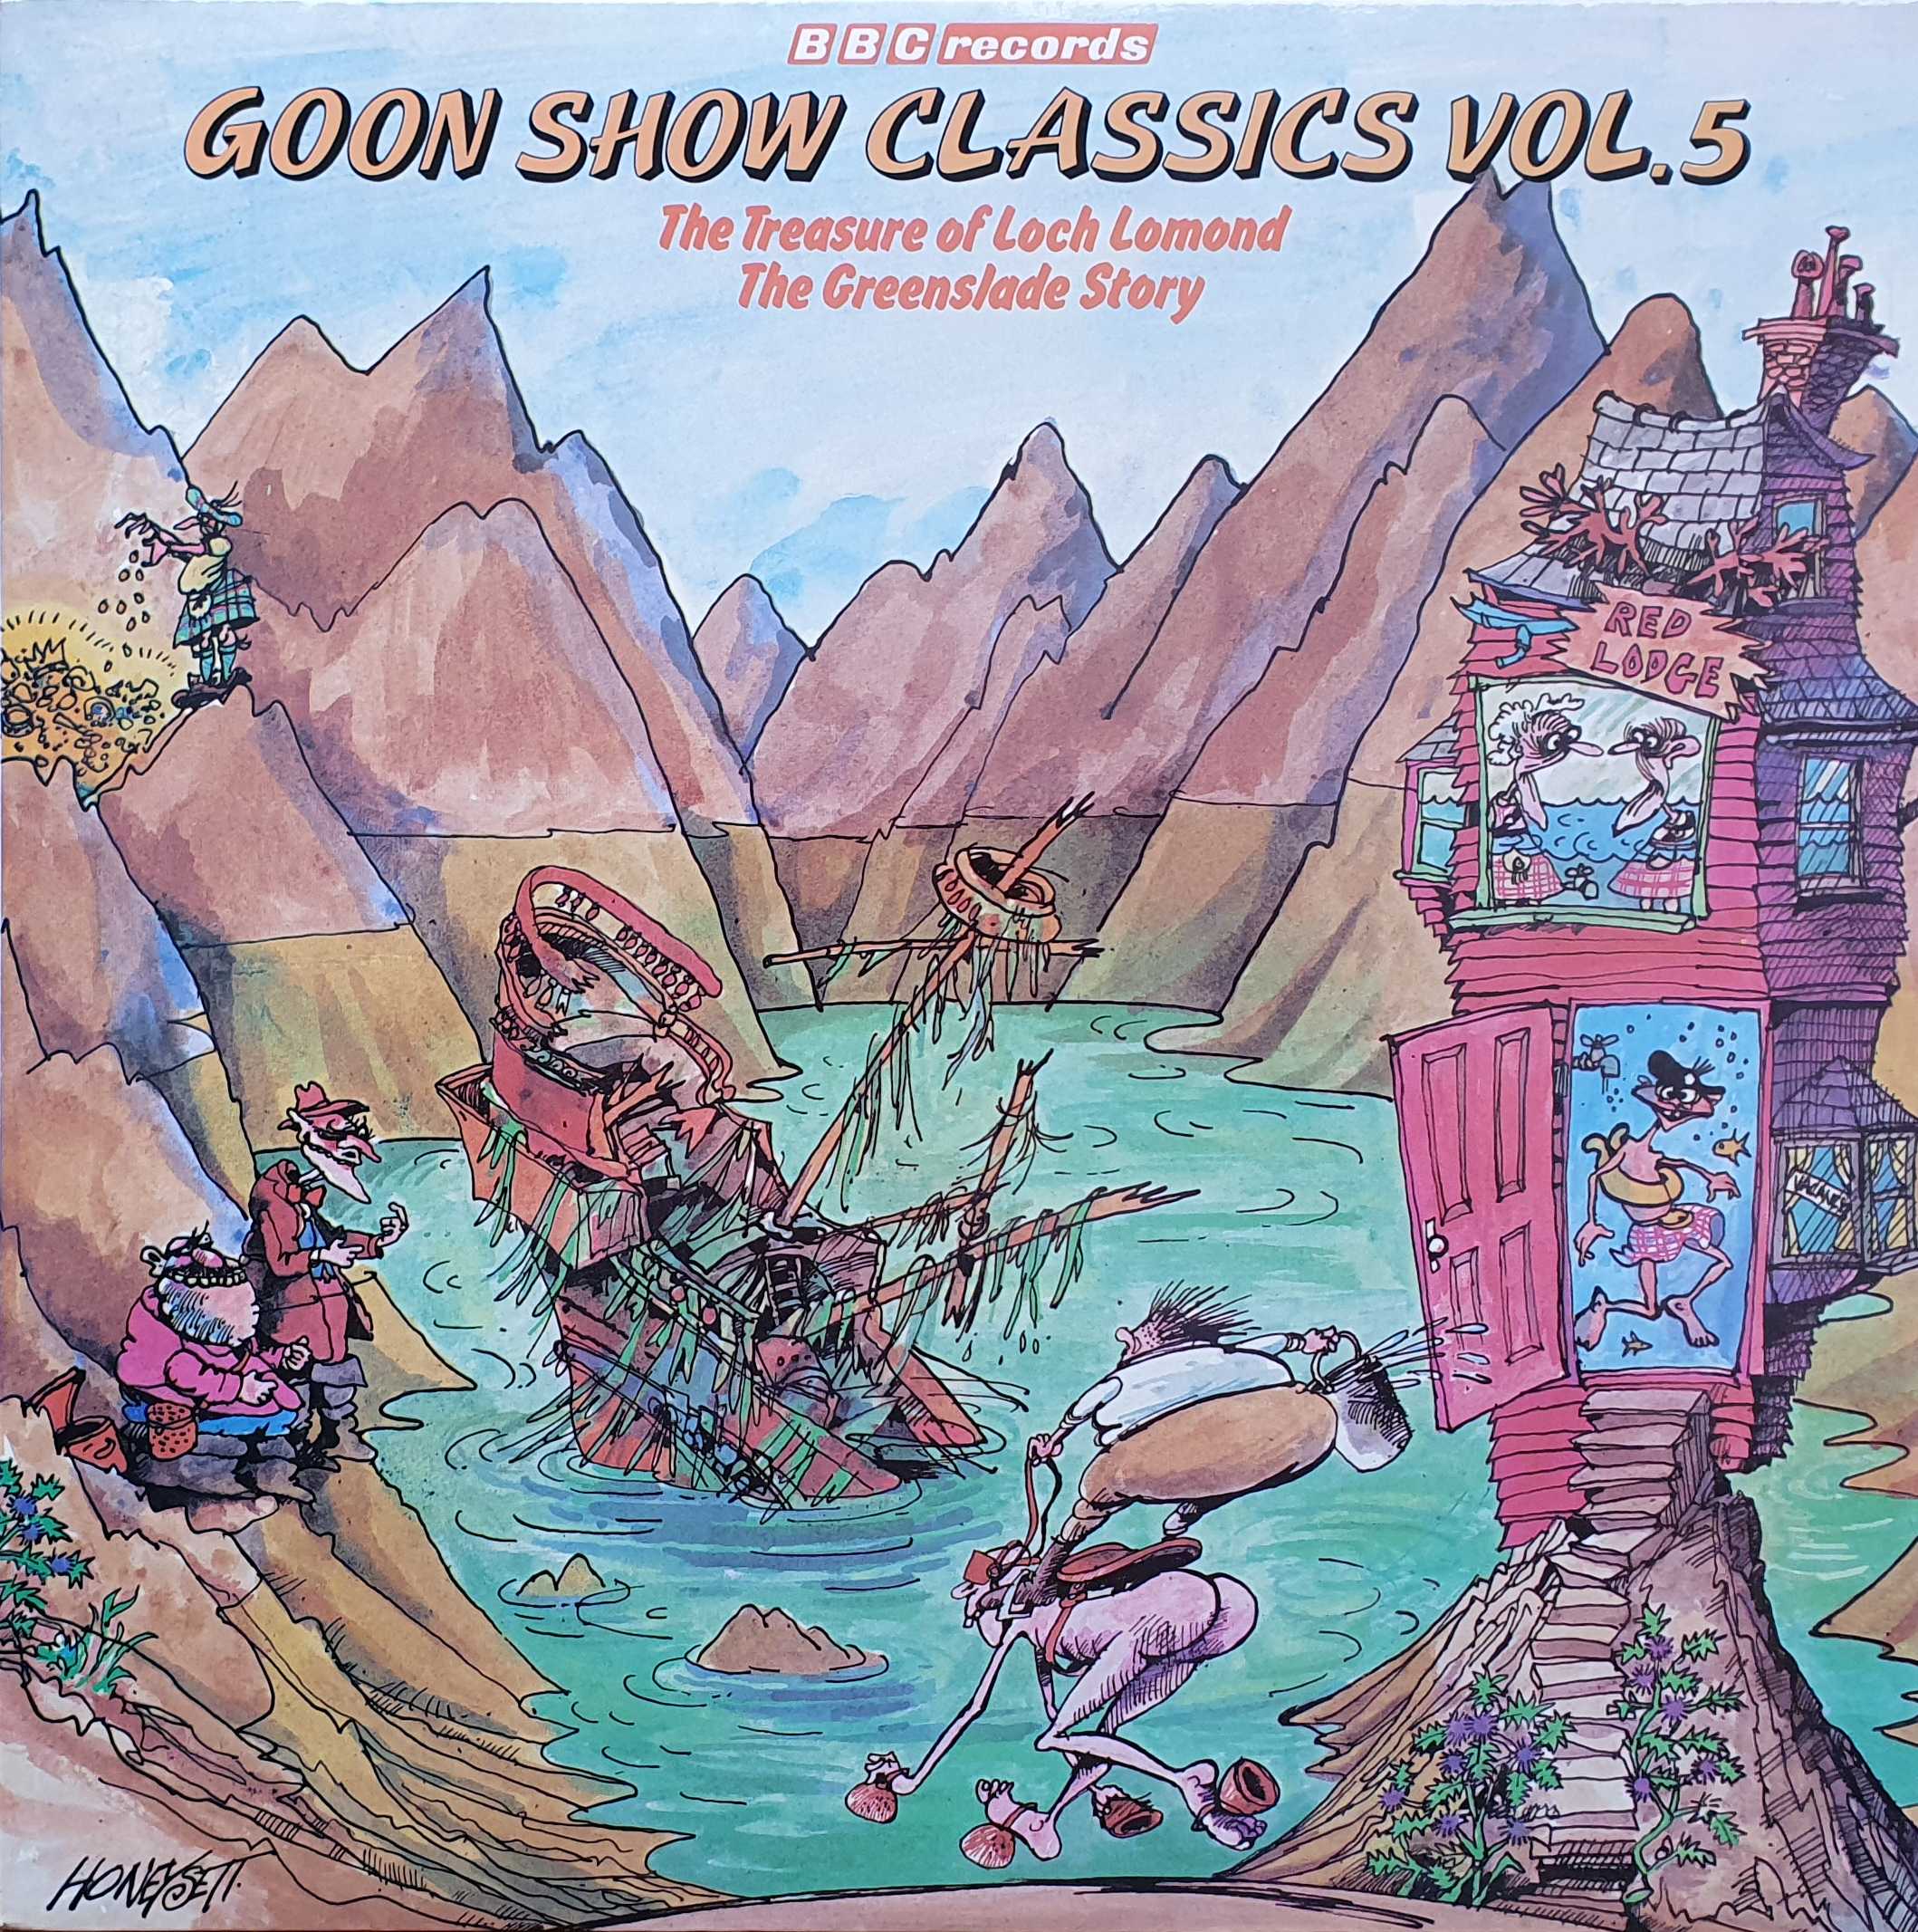 Picture of 2964 049 Goon Show classics vol. 5 (Australian import) by artist The Goon Show from the BBC albums - Records and Tapes library